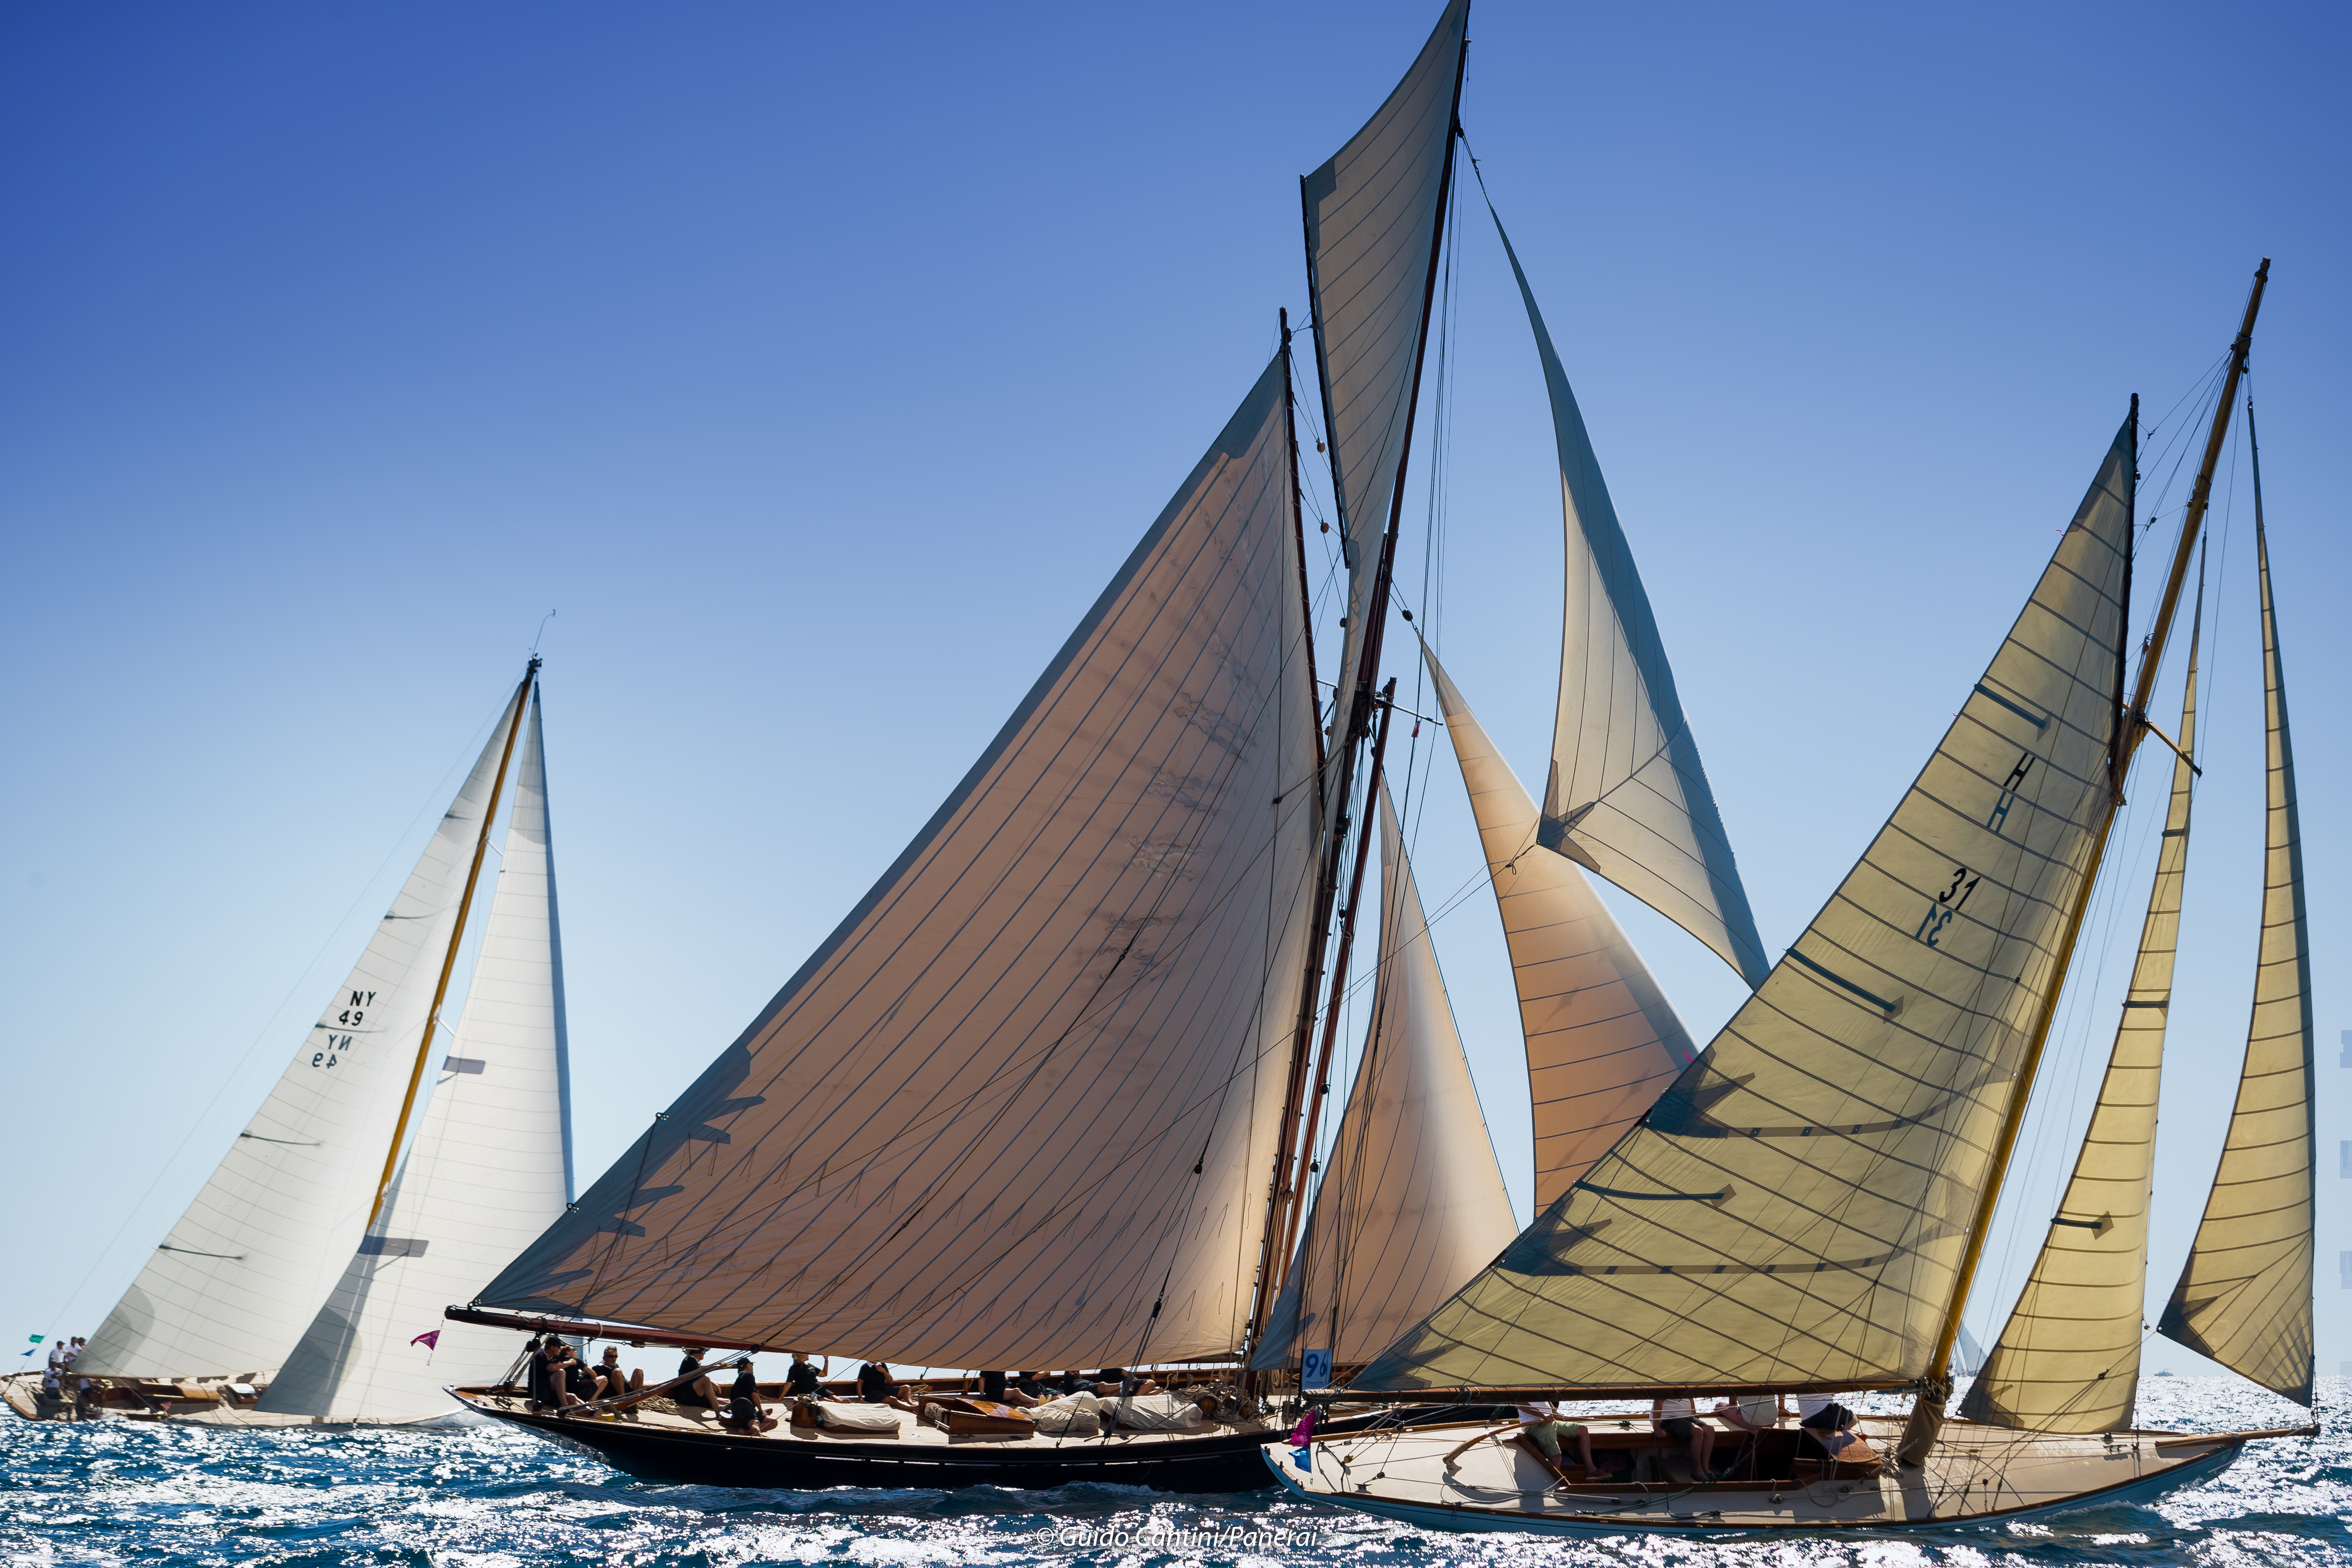  Dragon, Classic Yachts  Regates Royales  Cannes FRA  Day 4